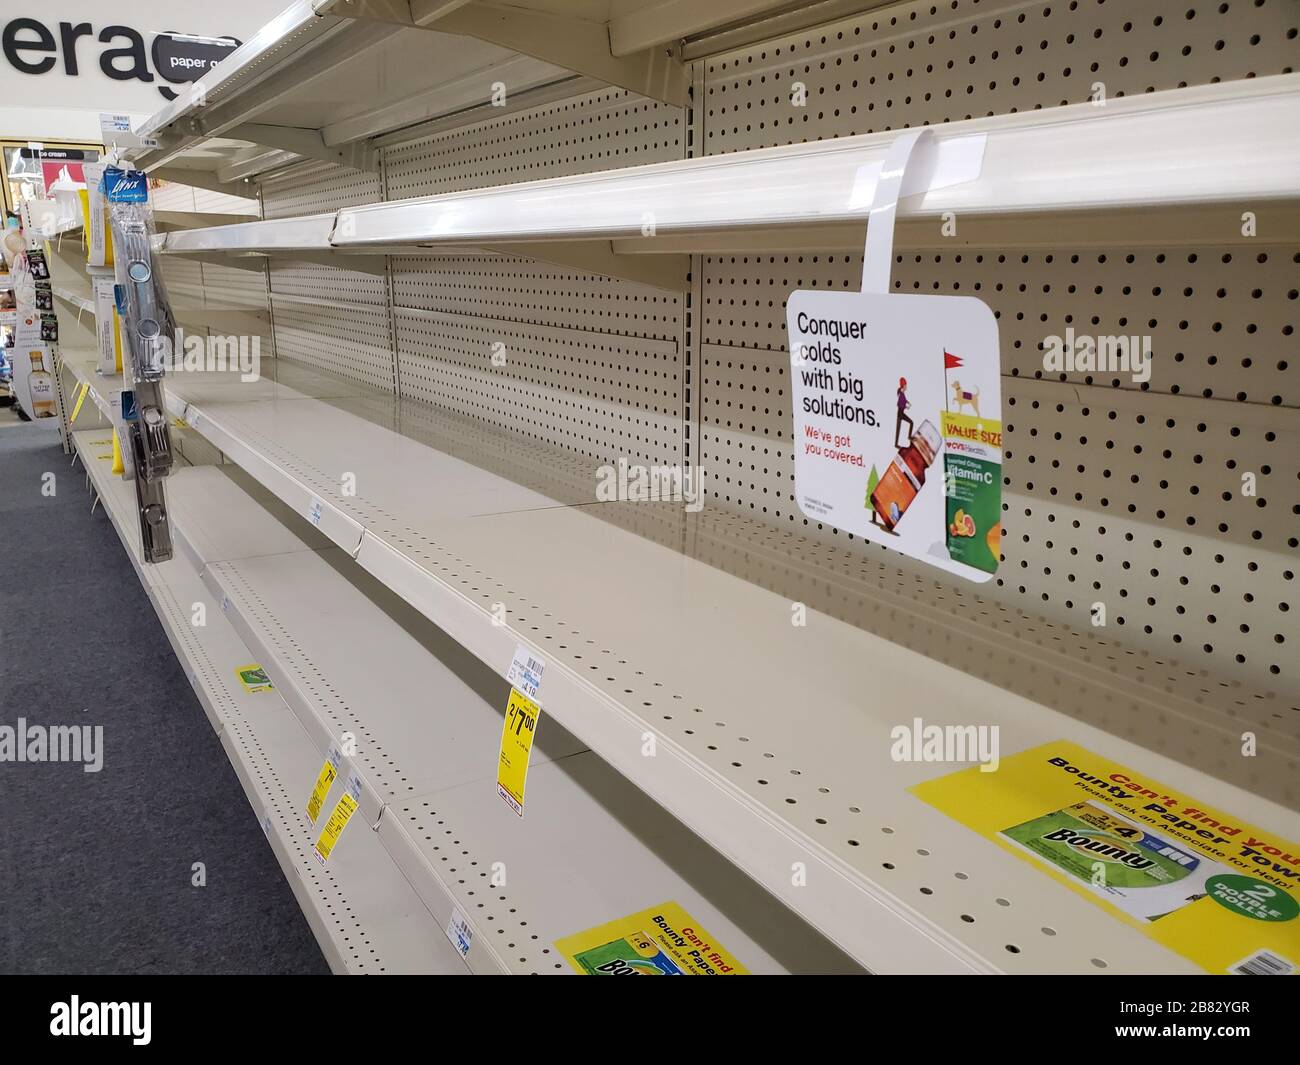 Following the announcement of a shelter in place order for the San Francisco Bay Area, shelves previously containing paper products were base at a pharmacy in Contra Costa County, San Ramon, California during an outbreak of the COVID-19 coronavirus, March 16, 2020. () Stock Photo